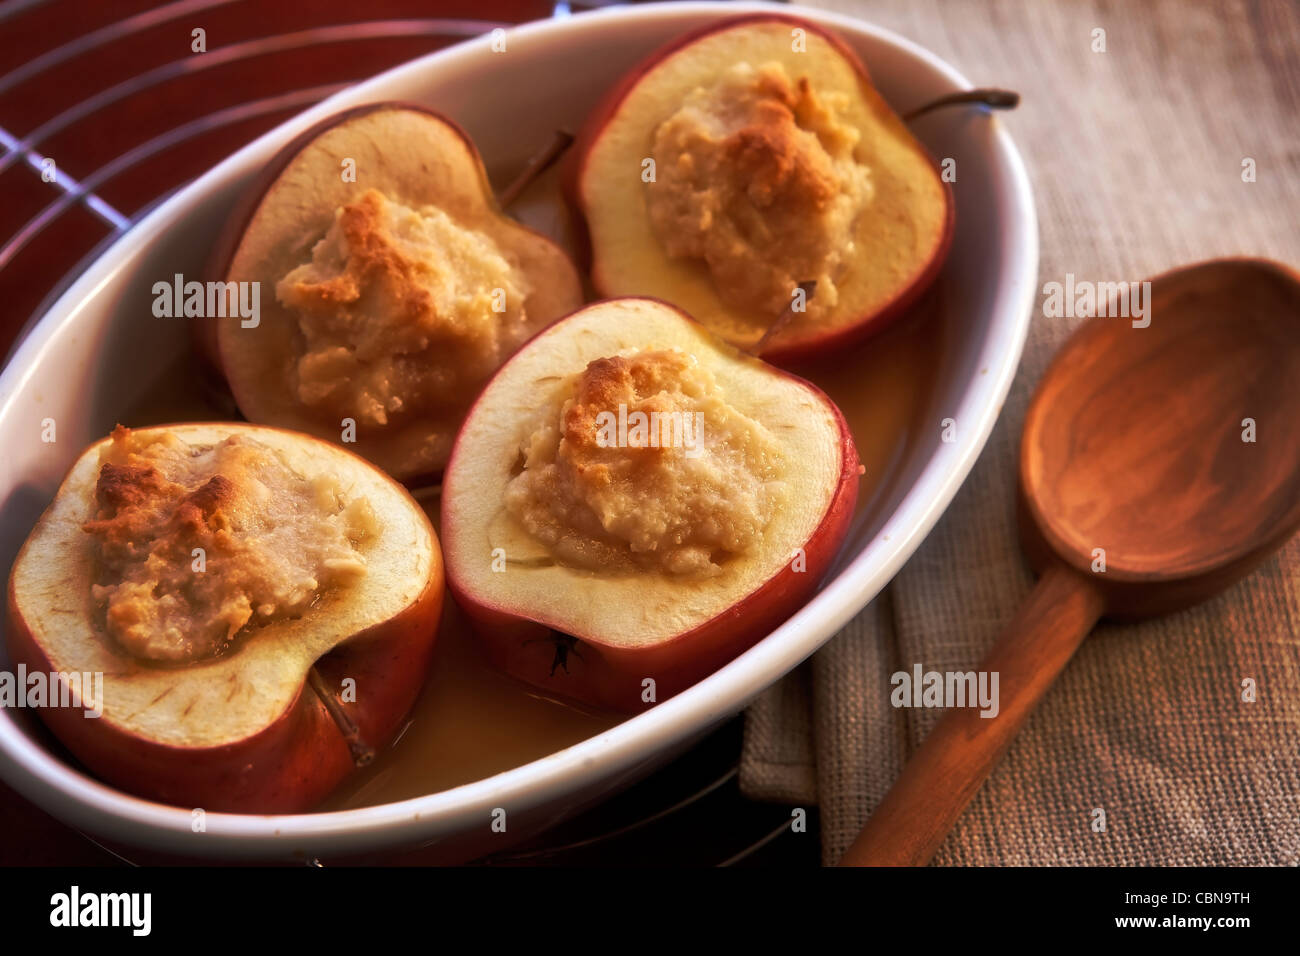 baked apples stuffed with amaretti and almond paste  Stock Photo